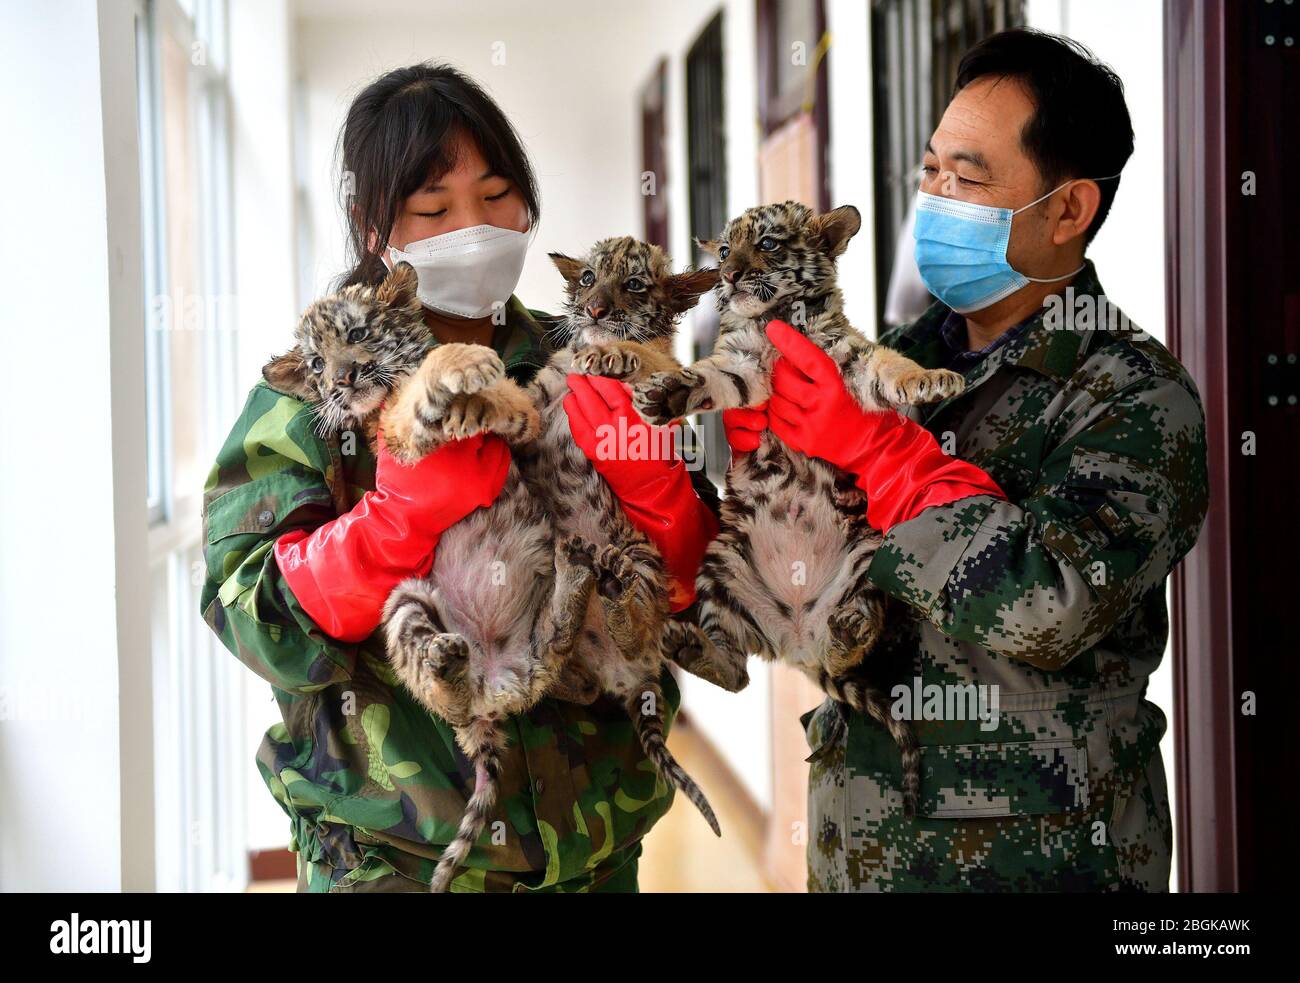 Zoo staff hold three baby South China tigers at the zoo in Wangcheng Park in Luoyang city, central China's Henan province, 27 March 2020. Stock Photo